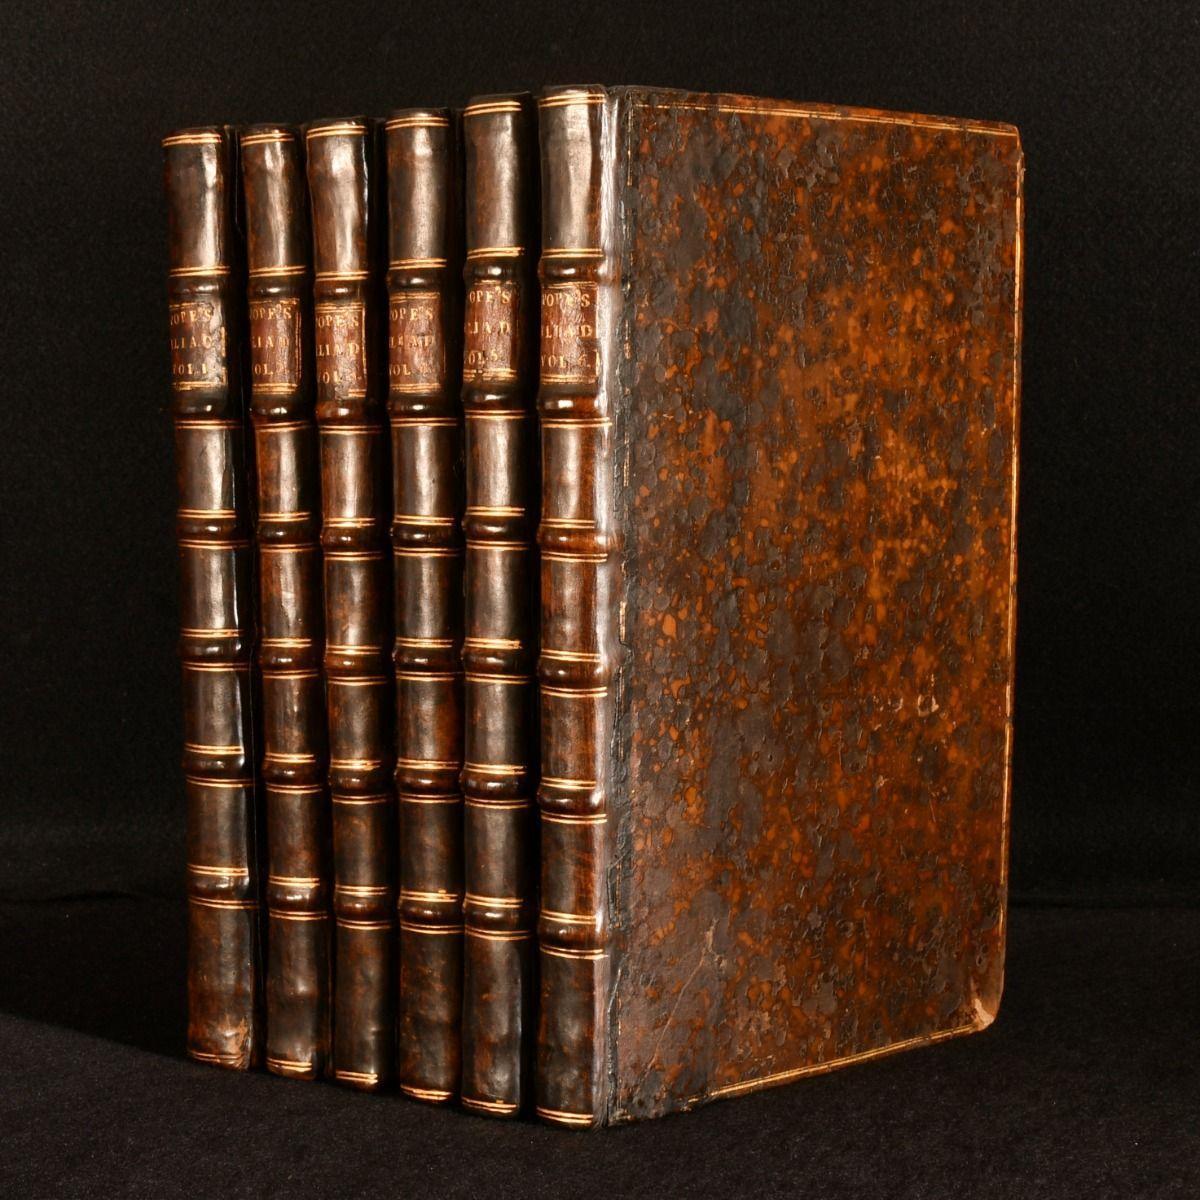 The first folio edition of Alexander Pope's monumental translation of the 'Iliad', an important and illustrated edition.

The first folio edition of Alexander Pope's translation.

Complete in six volumes.

Alexander Pope's important translation of